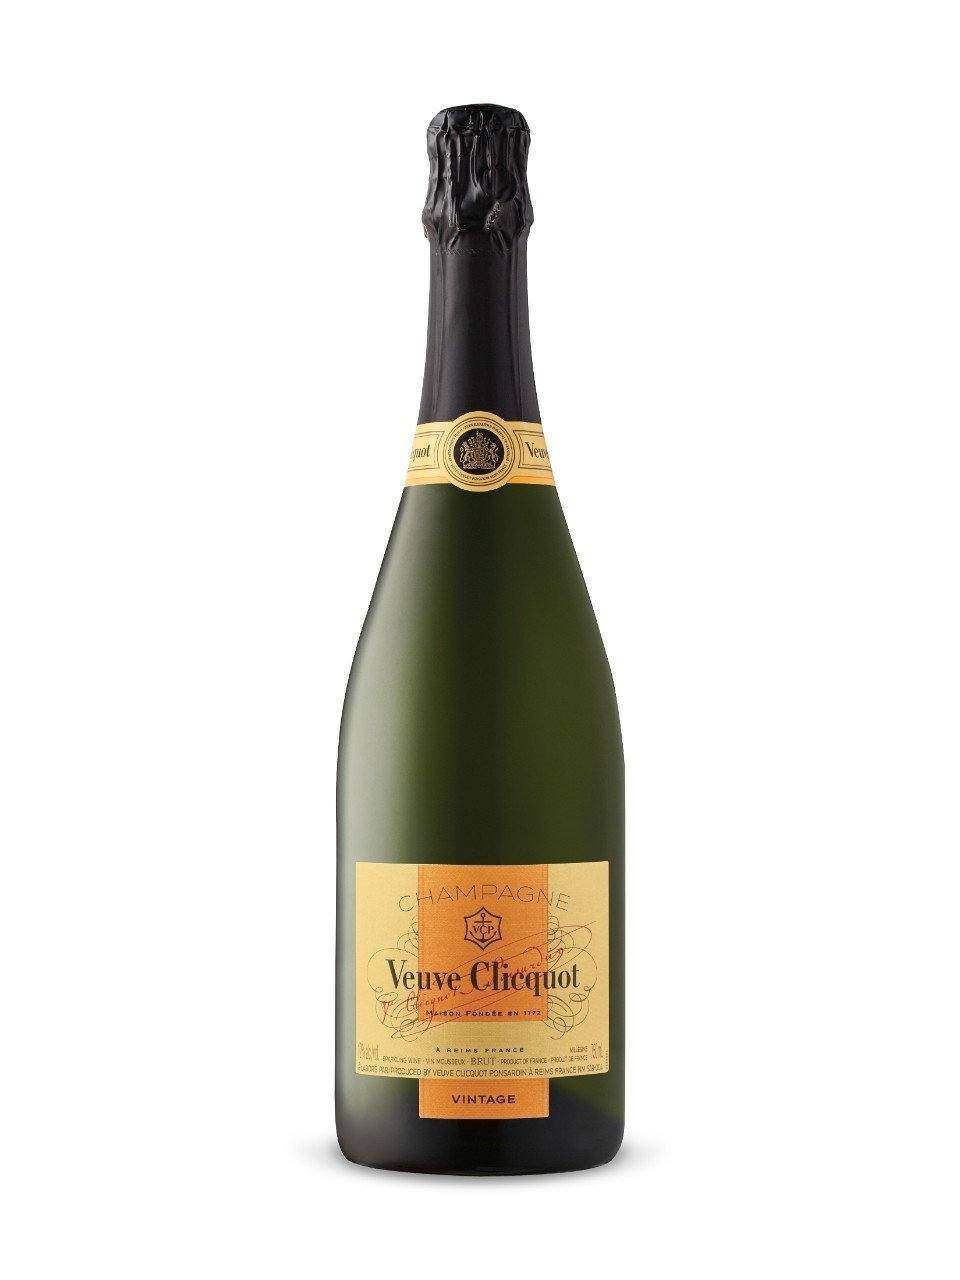 Veuve Clicquot Ponsardin Brut Vintage Champagne | Exquisite Wine & Alcohol Gift Delivery Toronto Canada | Vyno